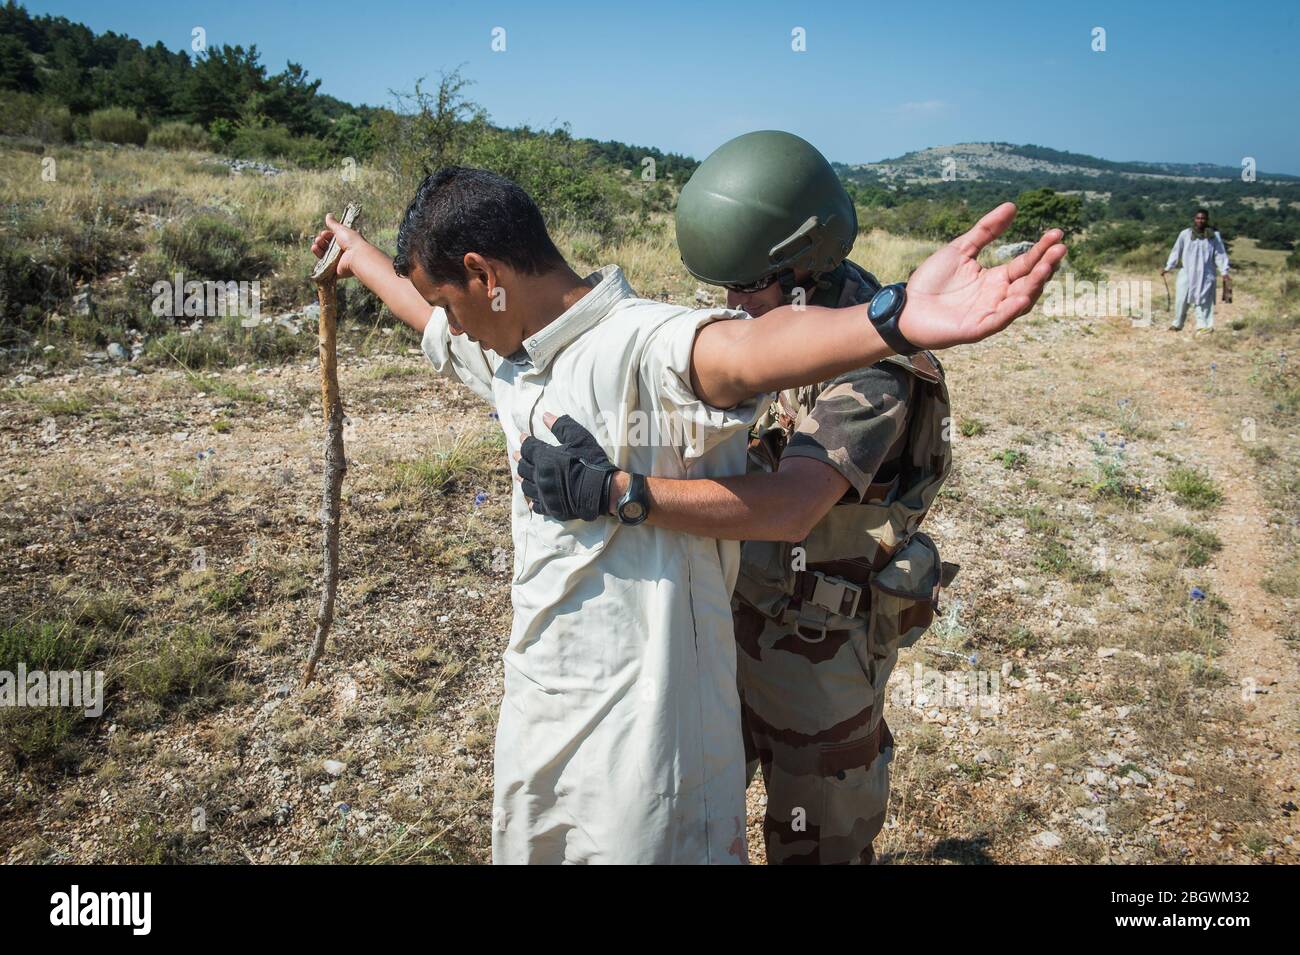 DRAGUIGNAN, FRANCE - JULY 21: a man getting arrested during a simulation of conflict between soldiers and terorists with fake corpses, fake terrorists Stock Photo